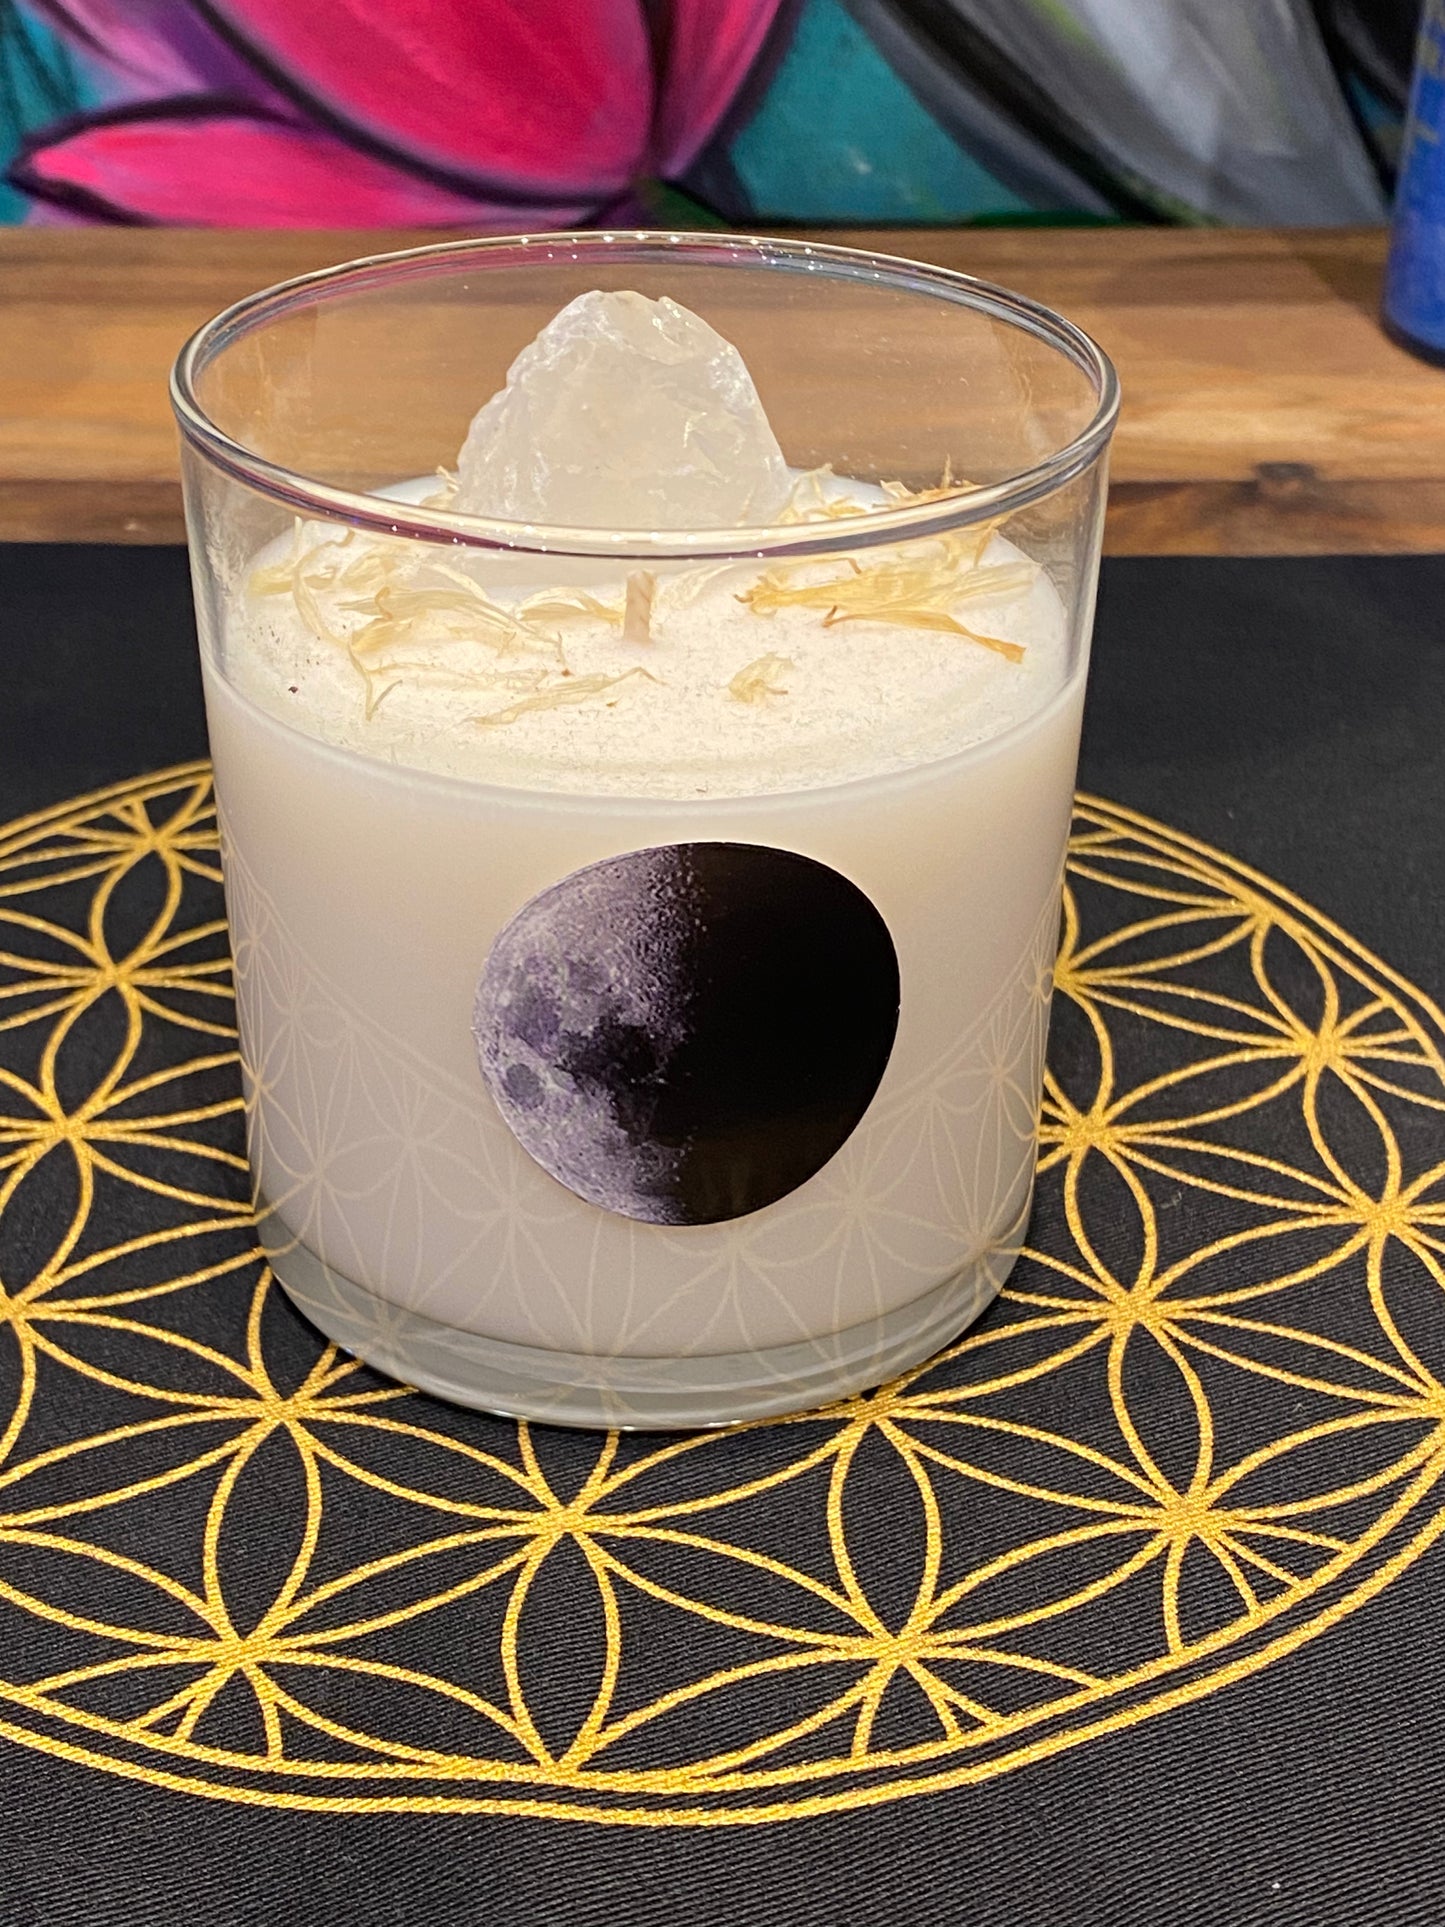 Moonchild Crystal Candle made by Lunastry